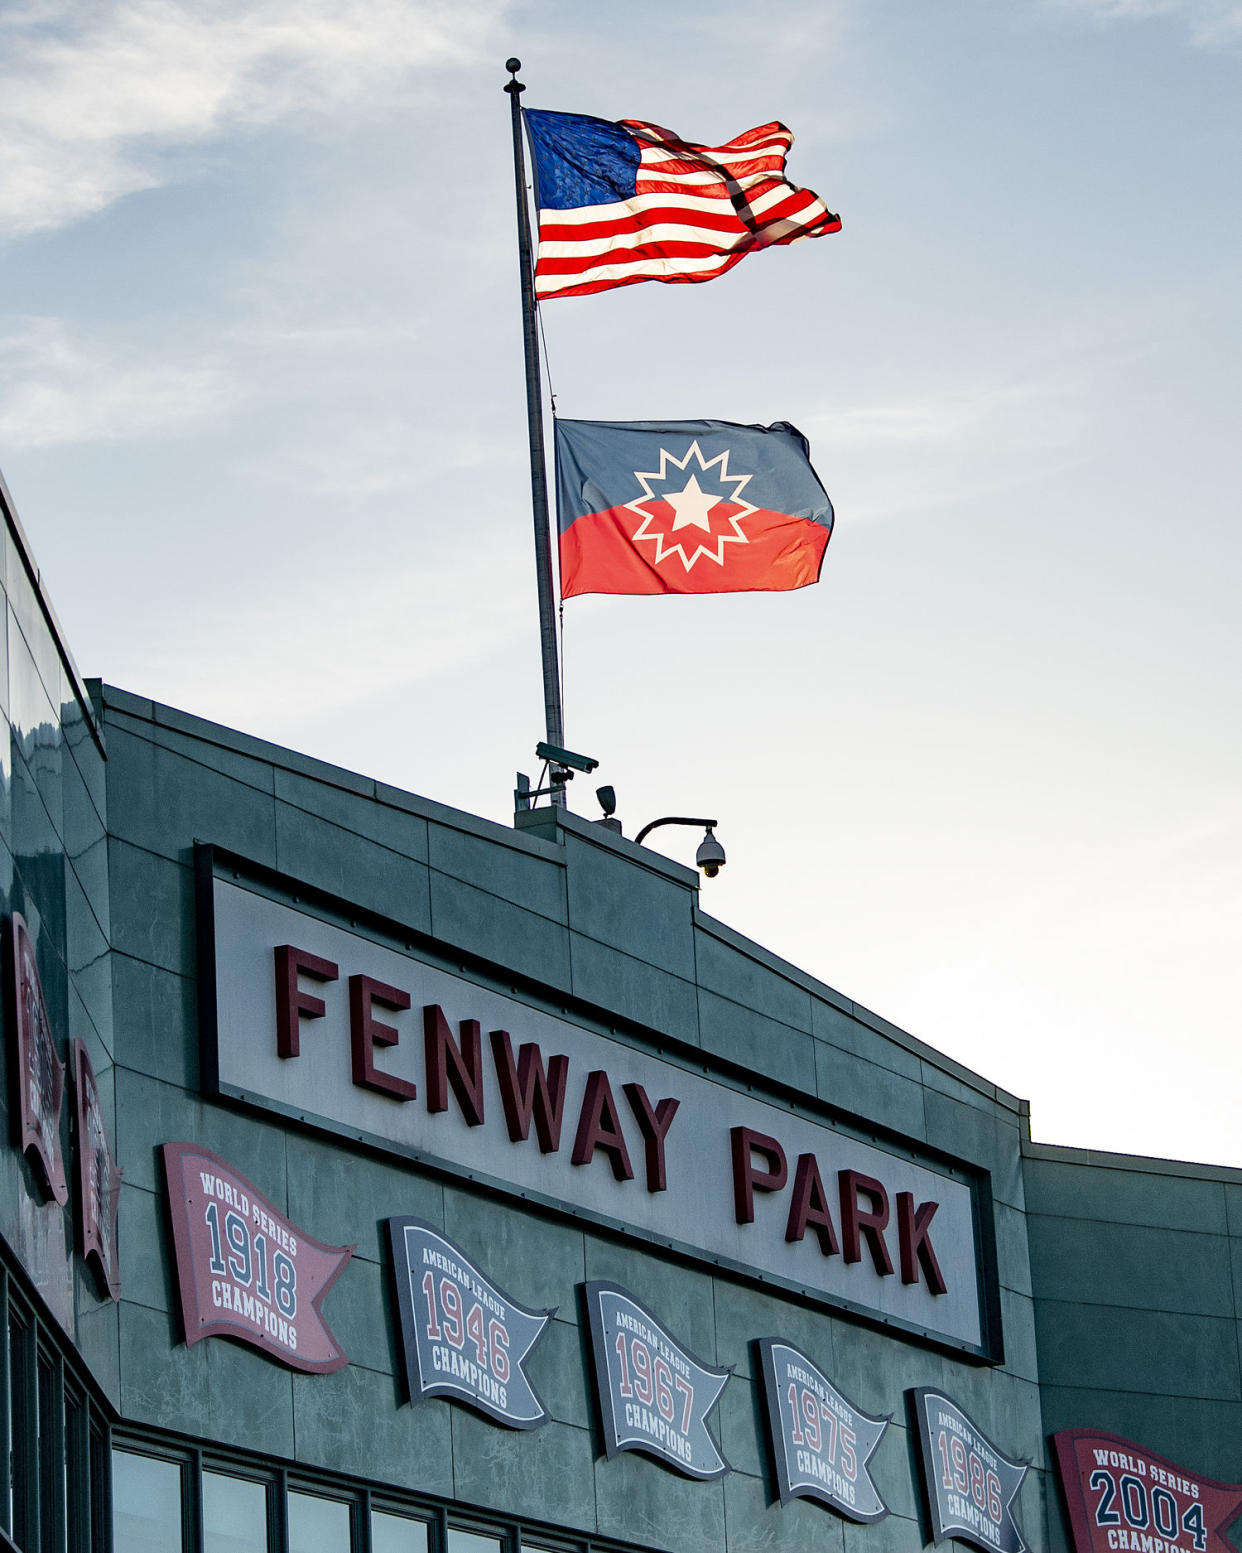 A flag in recognition of Juneteenth is displayed as the Major League Baseball season is postponed due the coronavirus pandemic on June 18, 2020 at Fenway Park in Boston, Massachusetts. (Billie Weiss / Boston Red Sox / Getty Images)